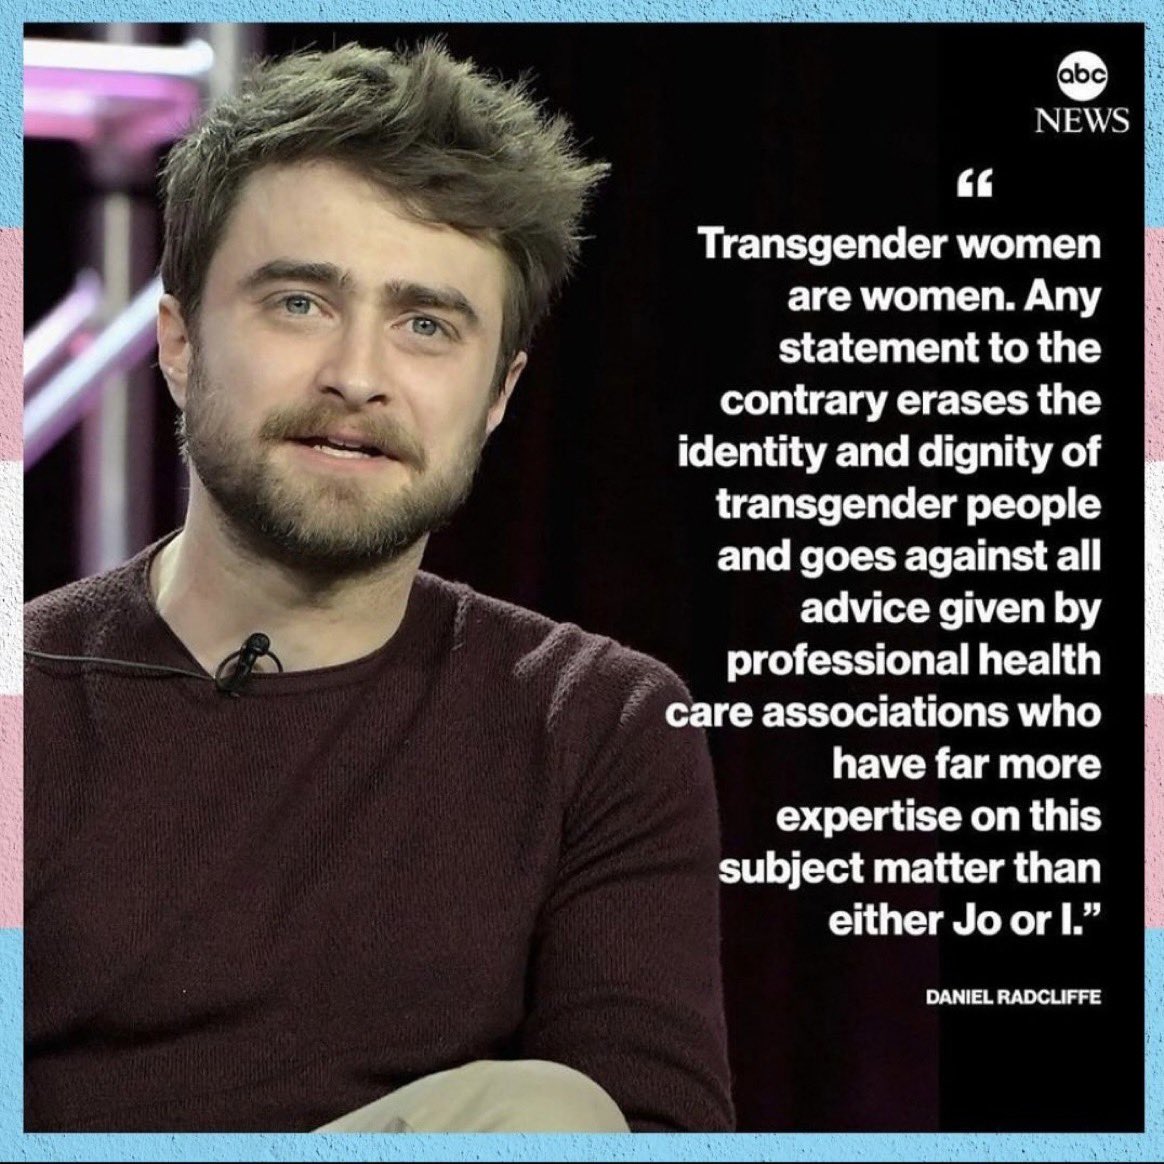 I think we should remember that this actor did say this. This absurd virtue signalling nonsense gibberish claiming men are women. Well Daniel, they aren’t. If a thousand “experts” advised me to call a man a woman - I wouldn’t, because it is a lie.